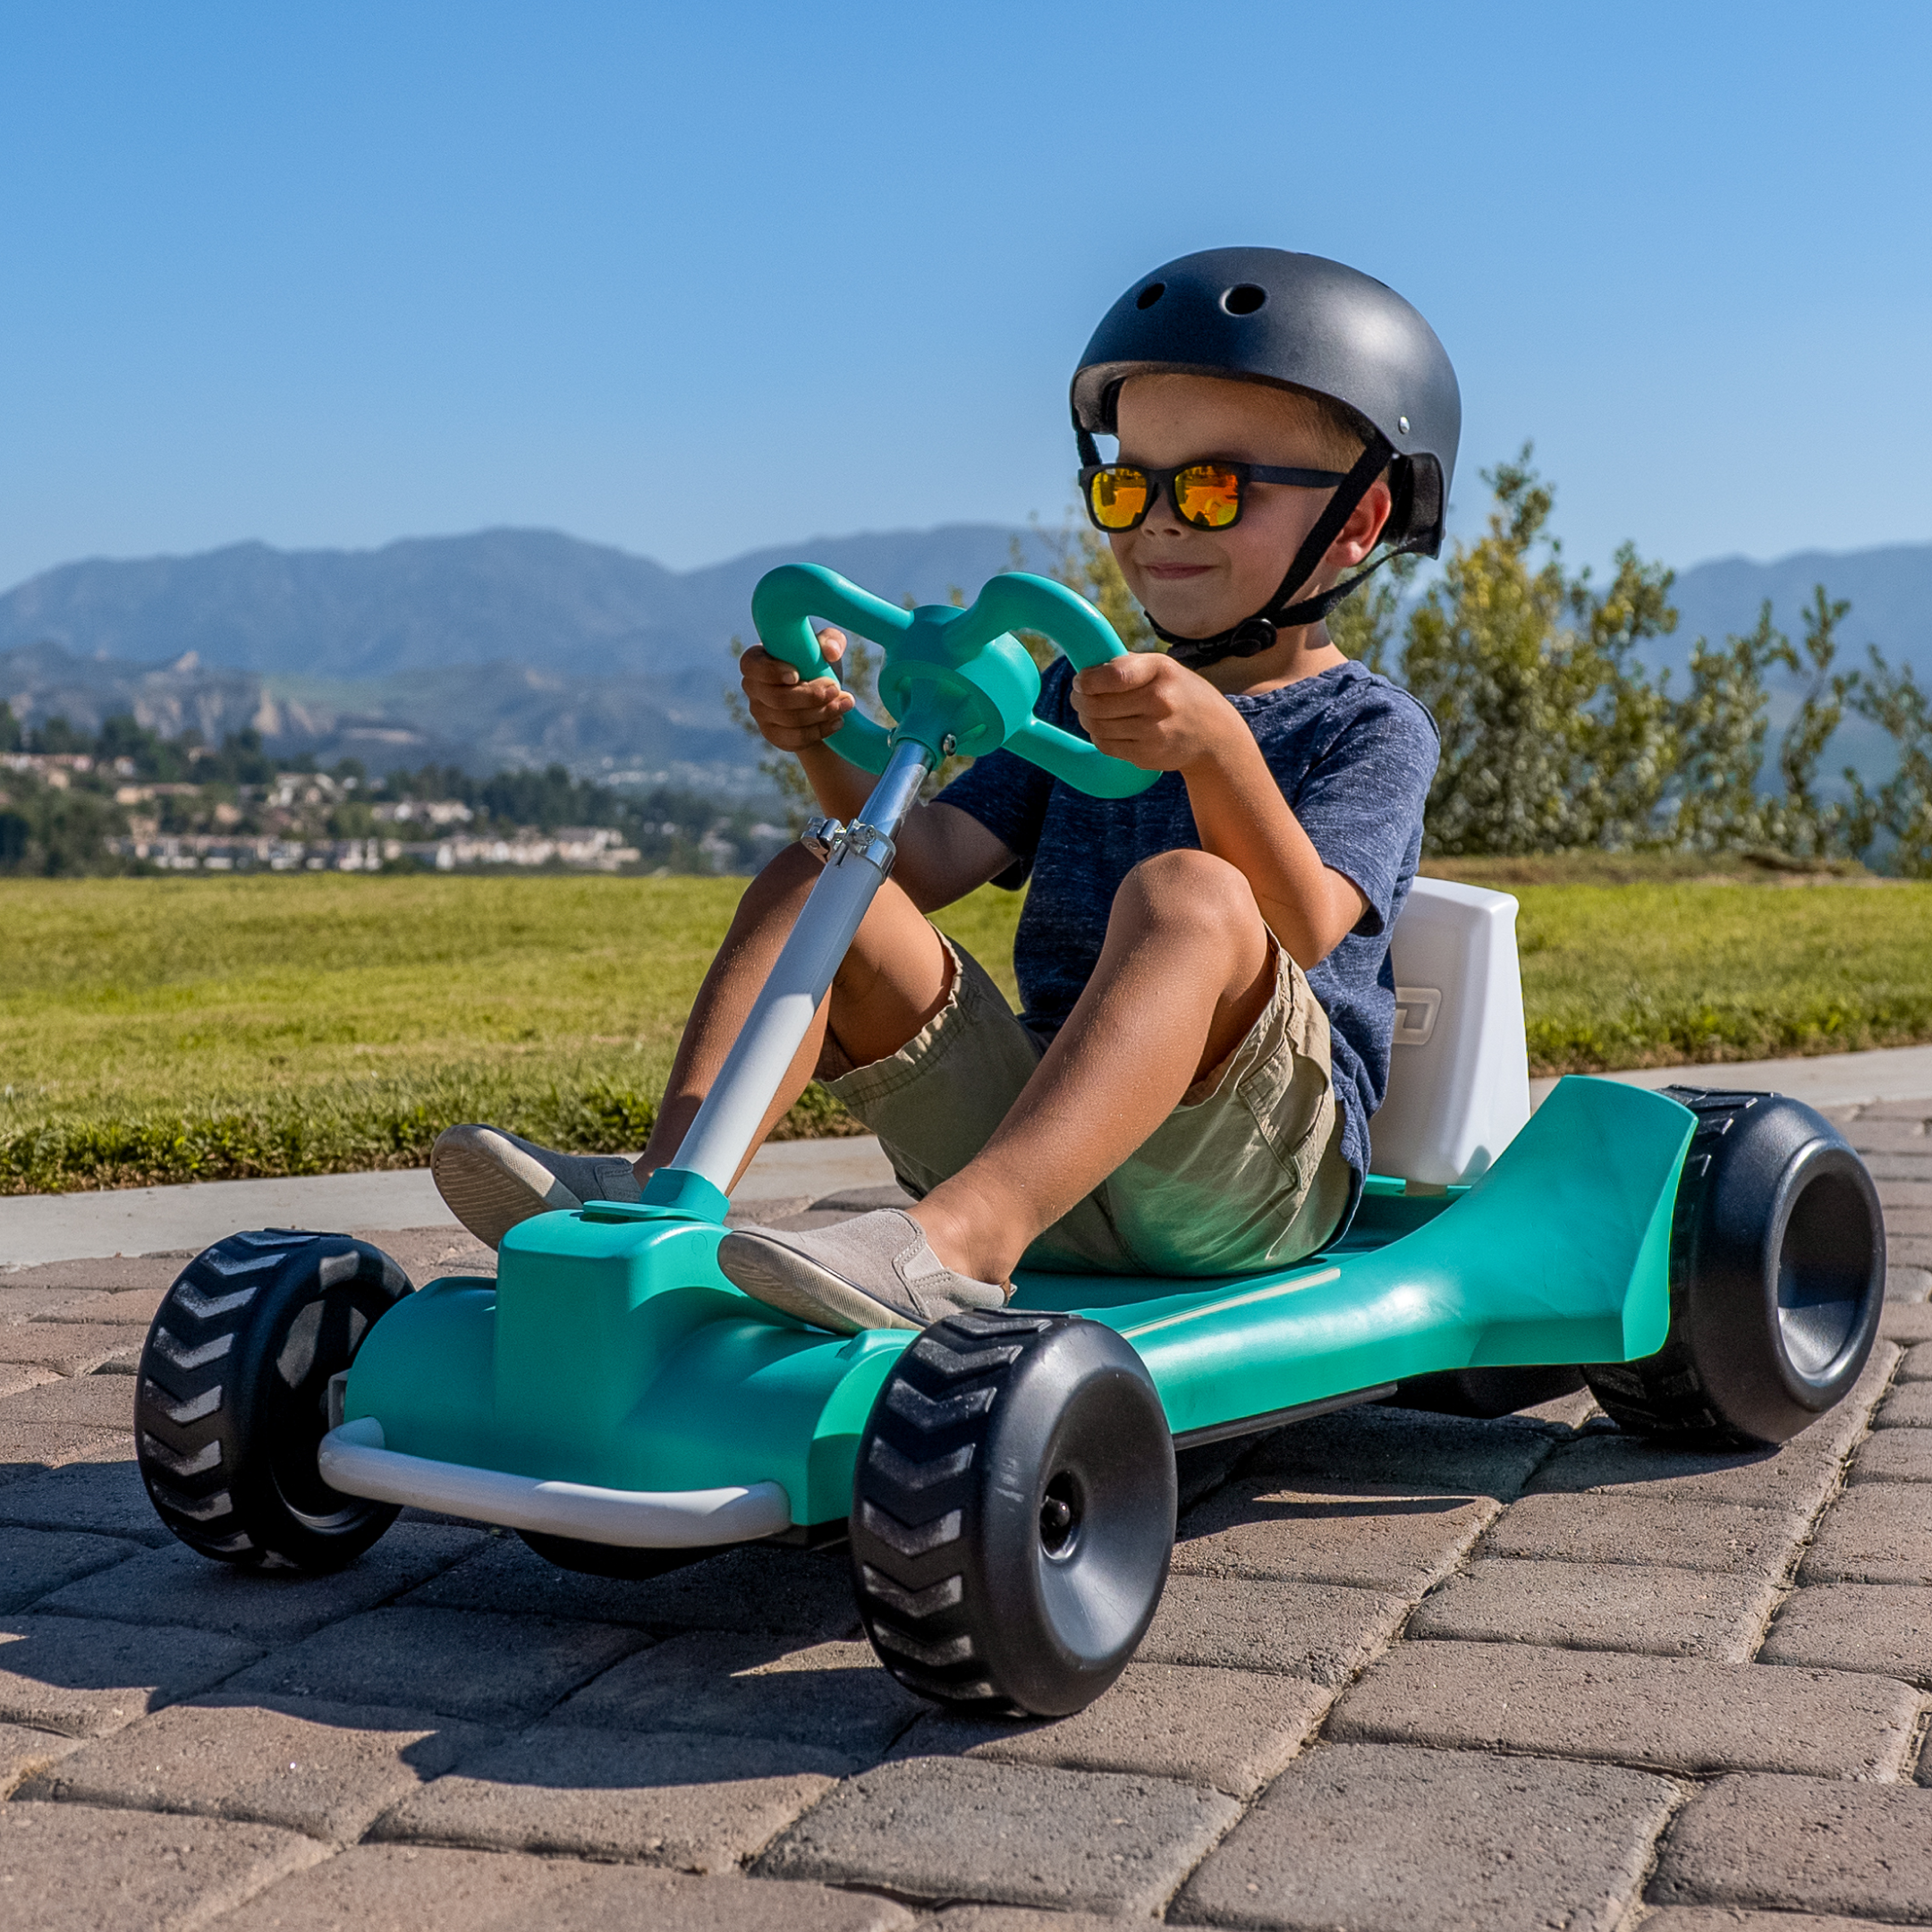 Boy in sunglasses riding in teal Zypster outside